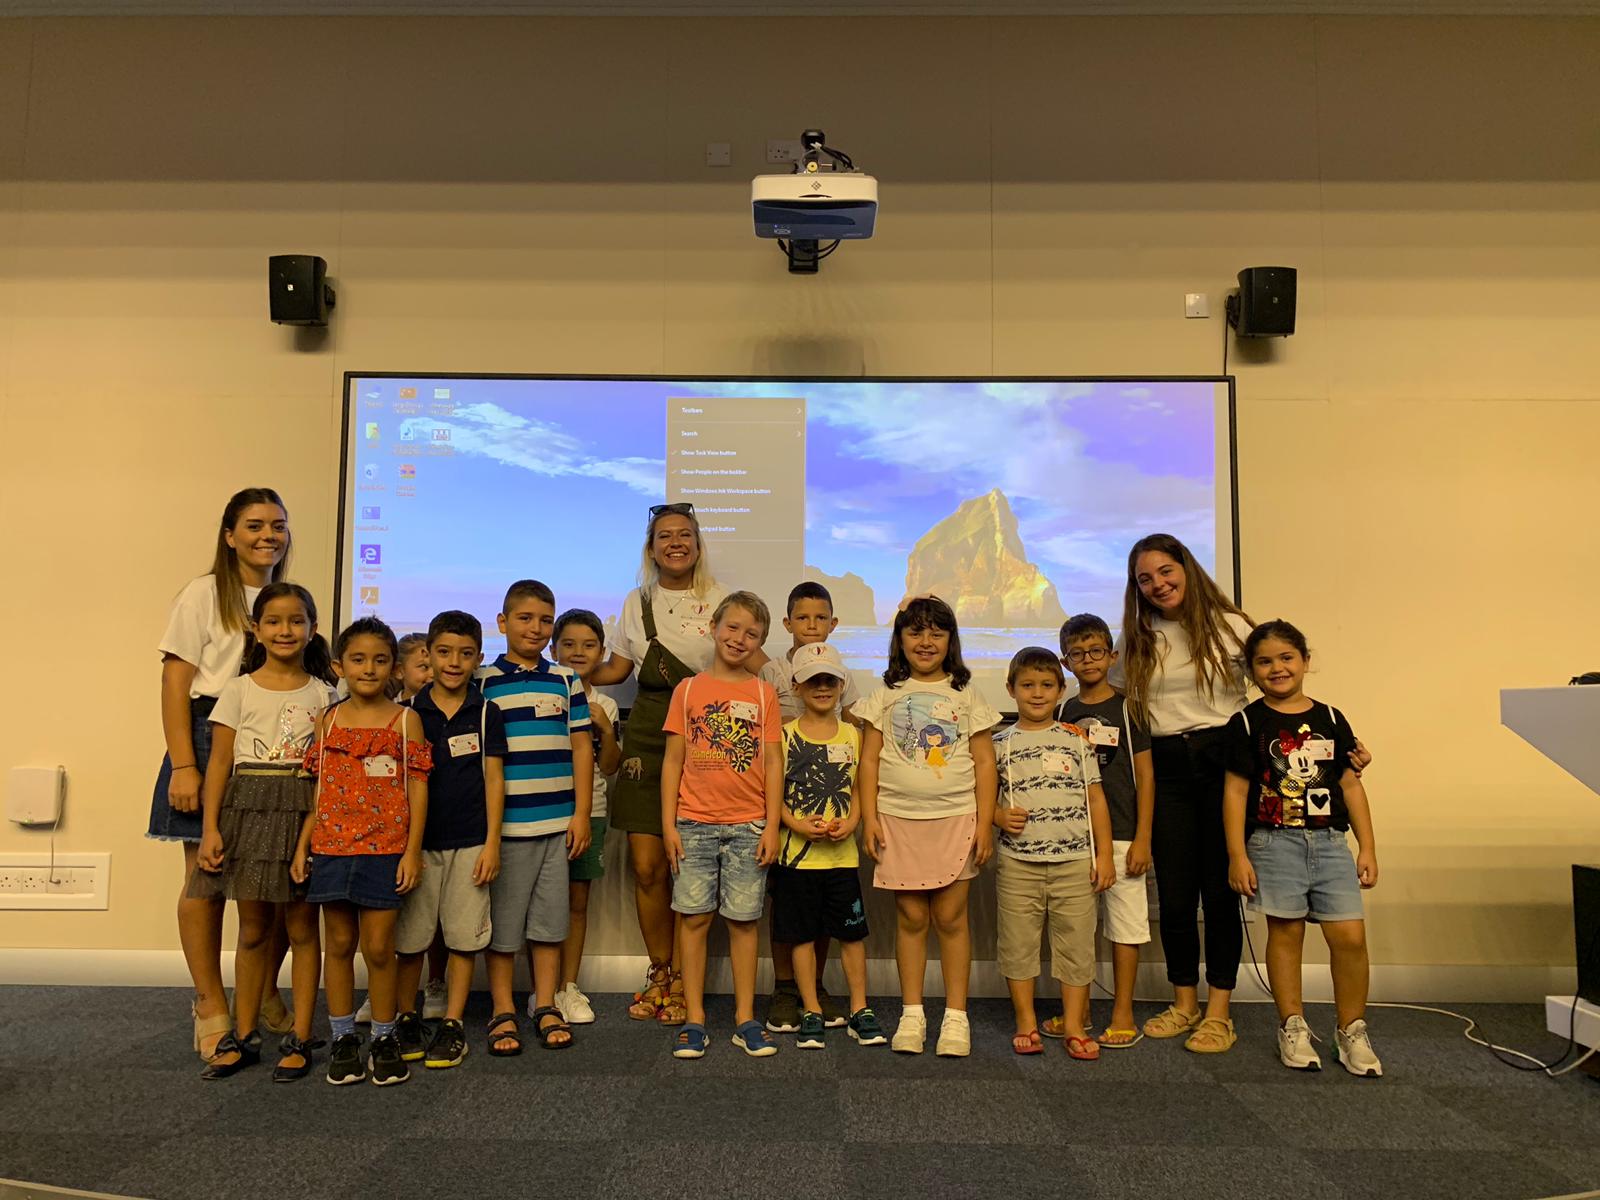 Educational Services of Özay Günsel Children’s University for the Fall Term of 2019-2020 has commenced